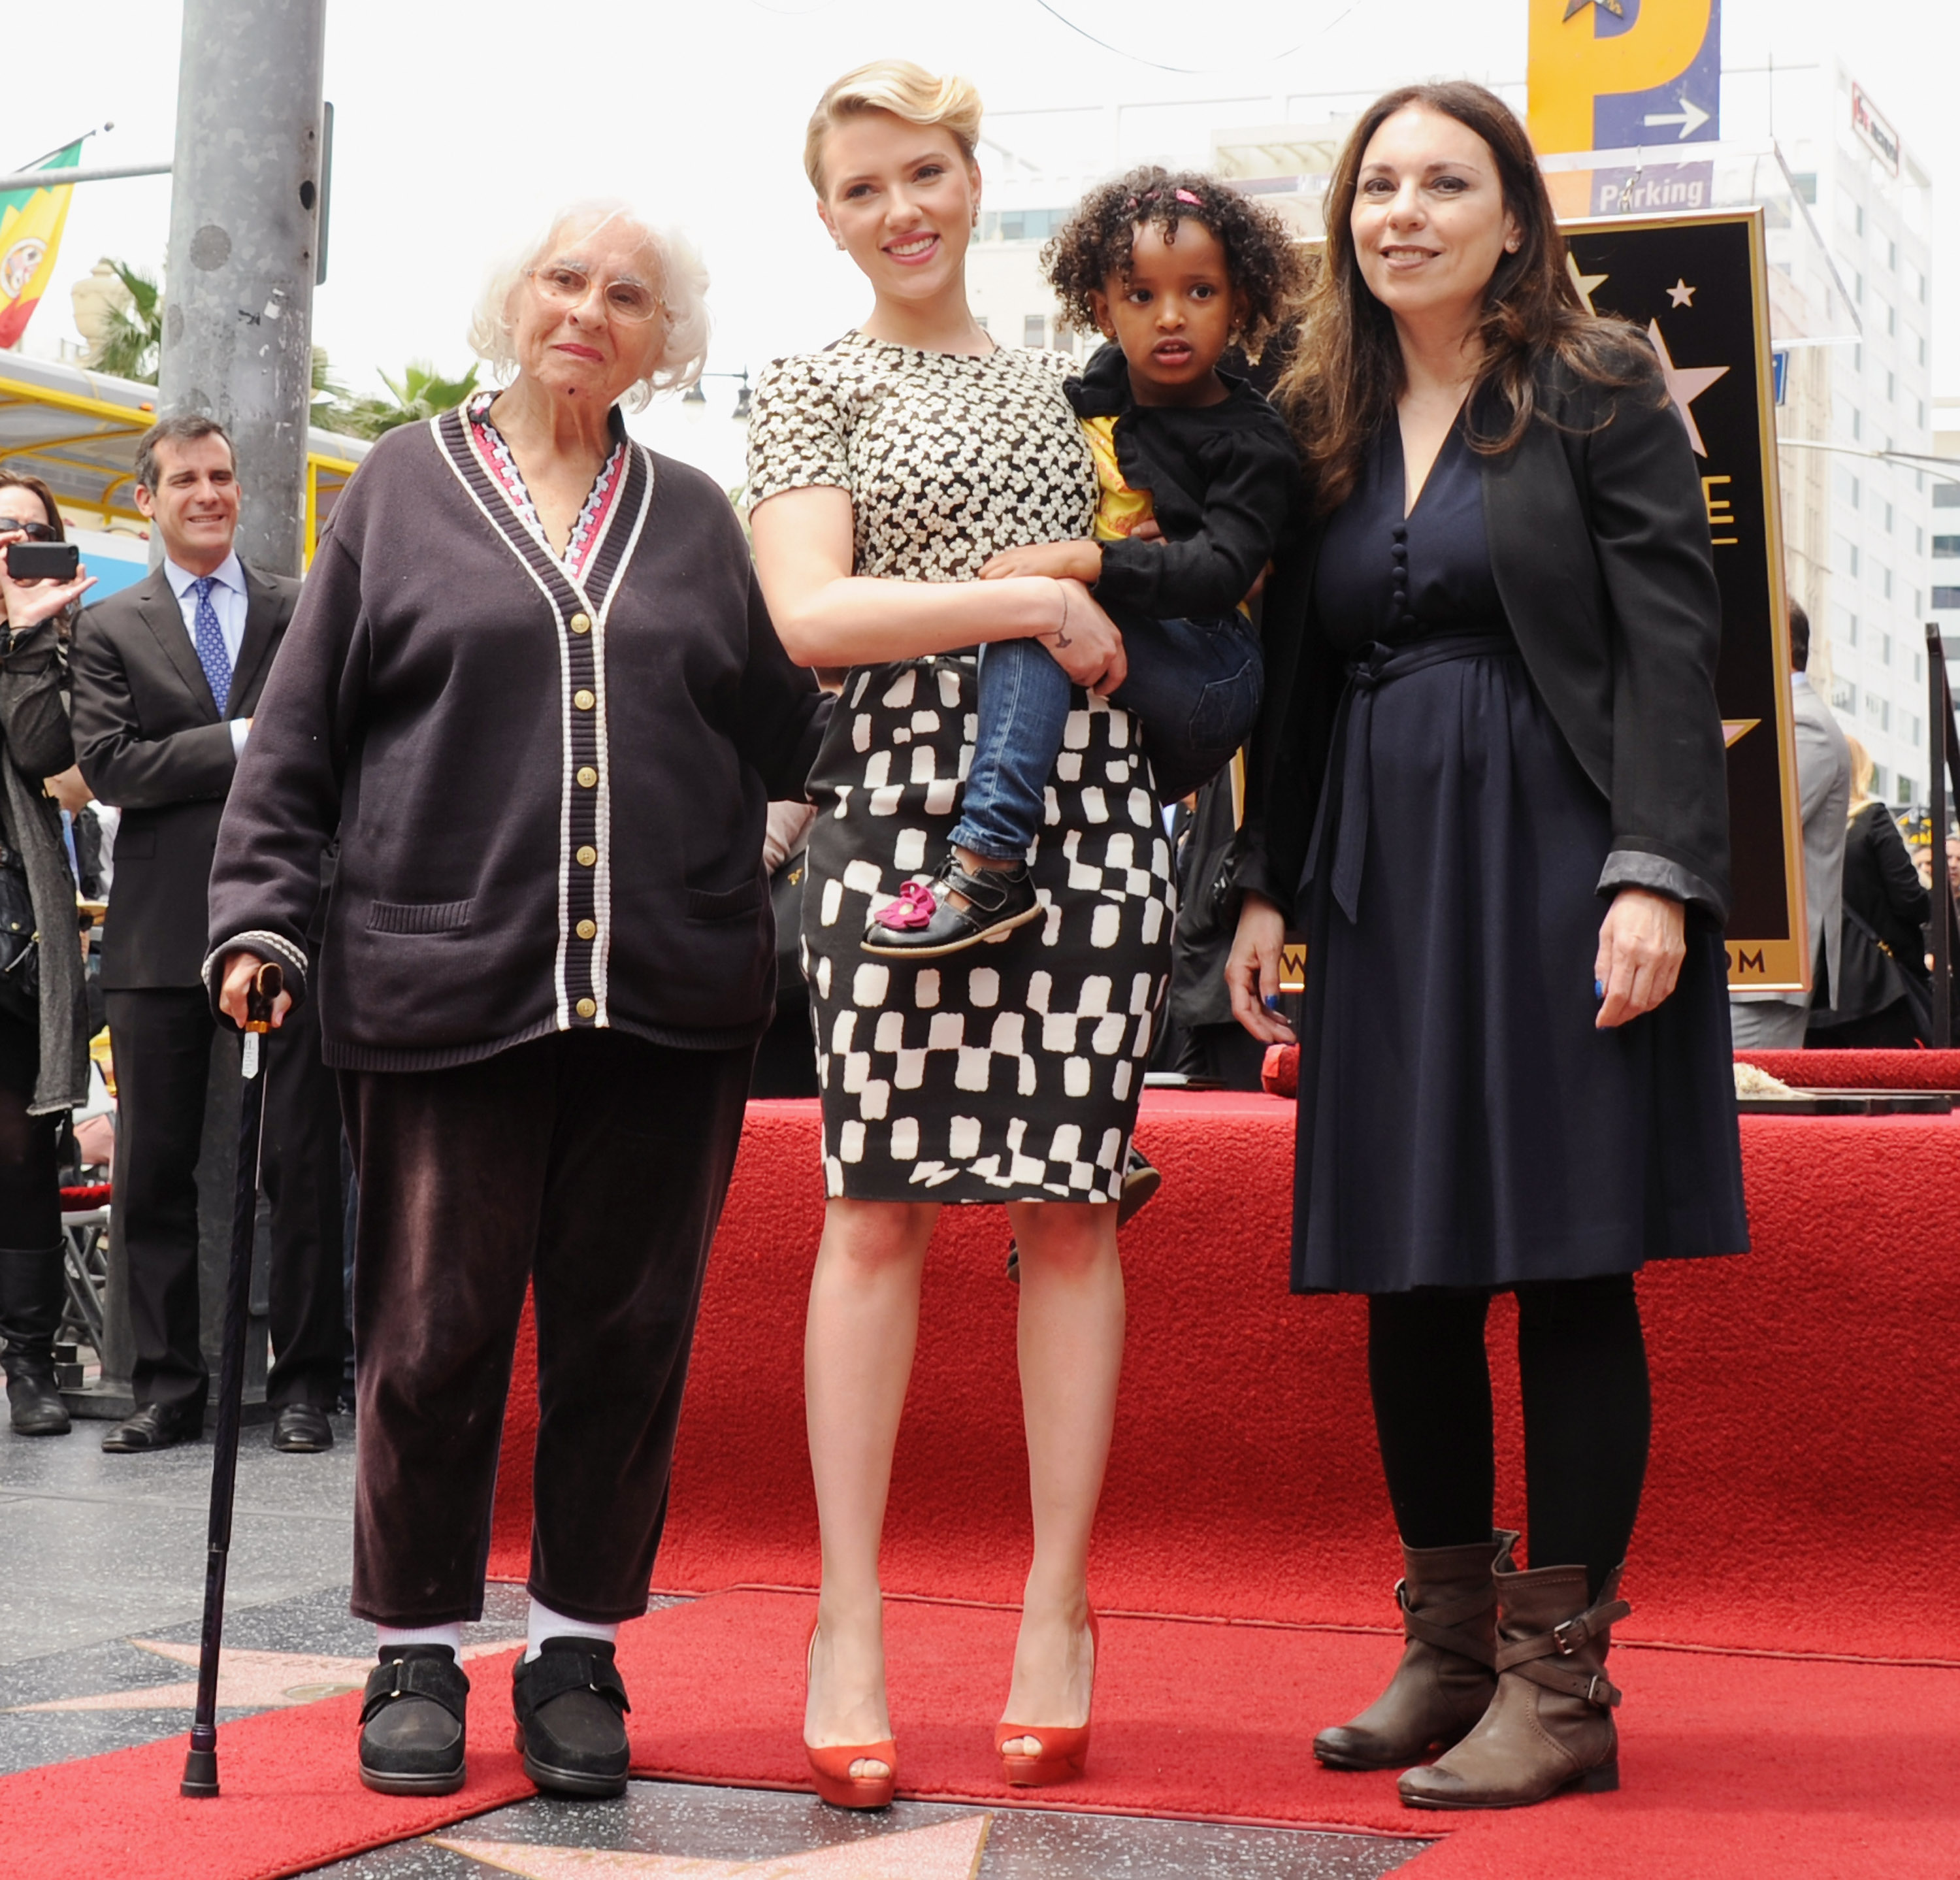 Scarlett Johansson (middle), grandmother, sister Fenan and mom Melanie Sloan during the ceremony honoring Scarlett Johansson with a star on the Hollywood Walk of Fame on May 2, 2012 in Hollywood, California. | Source: Getty Images